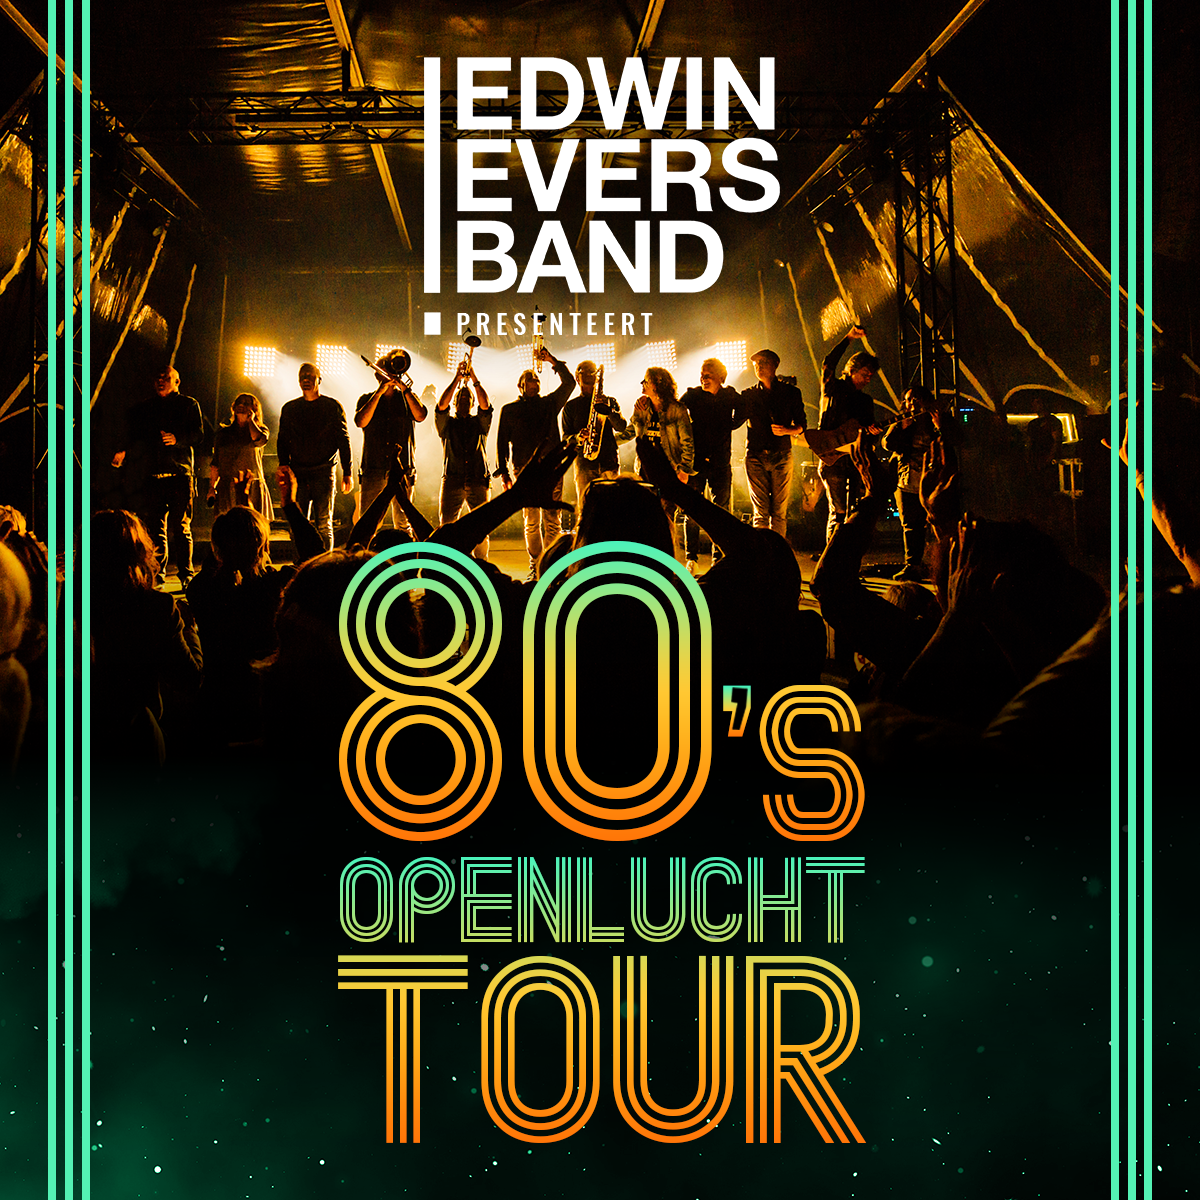 Edwin Evers Band – 80’s Openlucht Tour